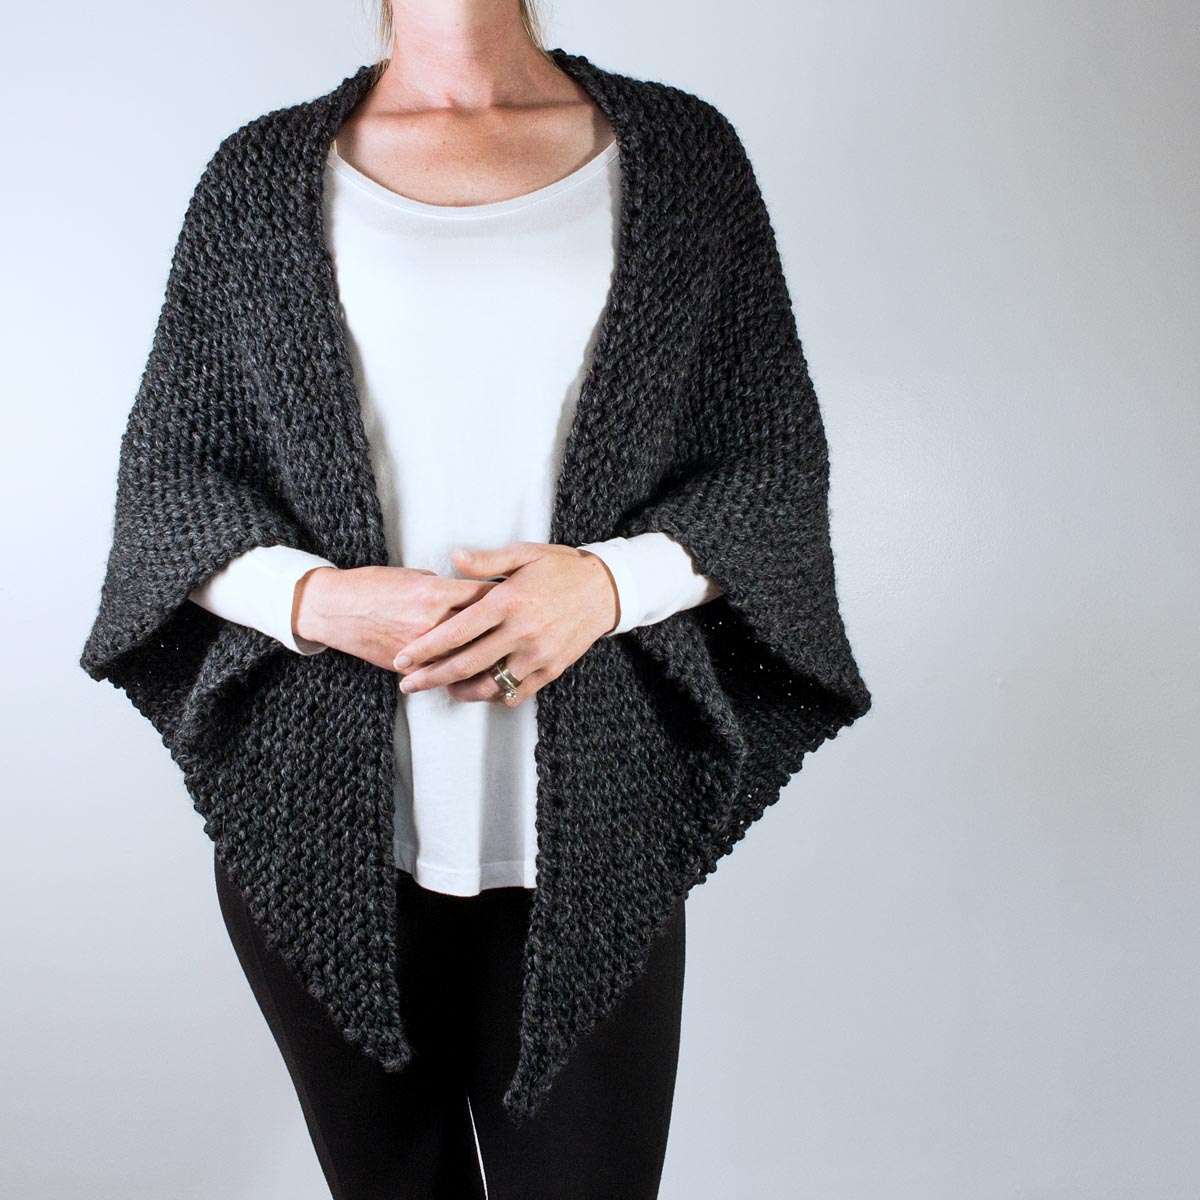 Free Wrap Knitting Patterns - 15 of the Best